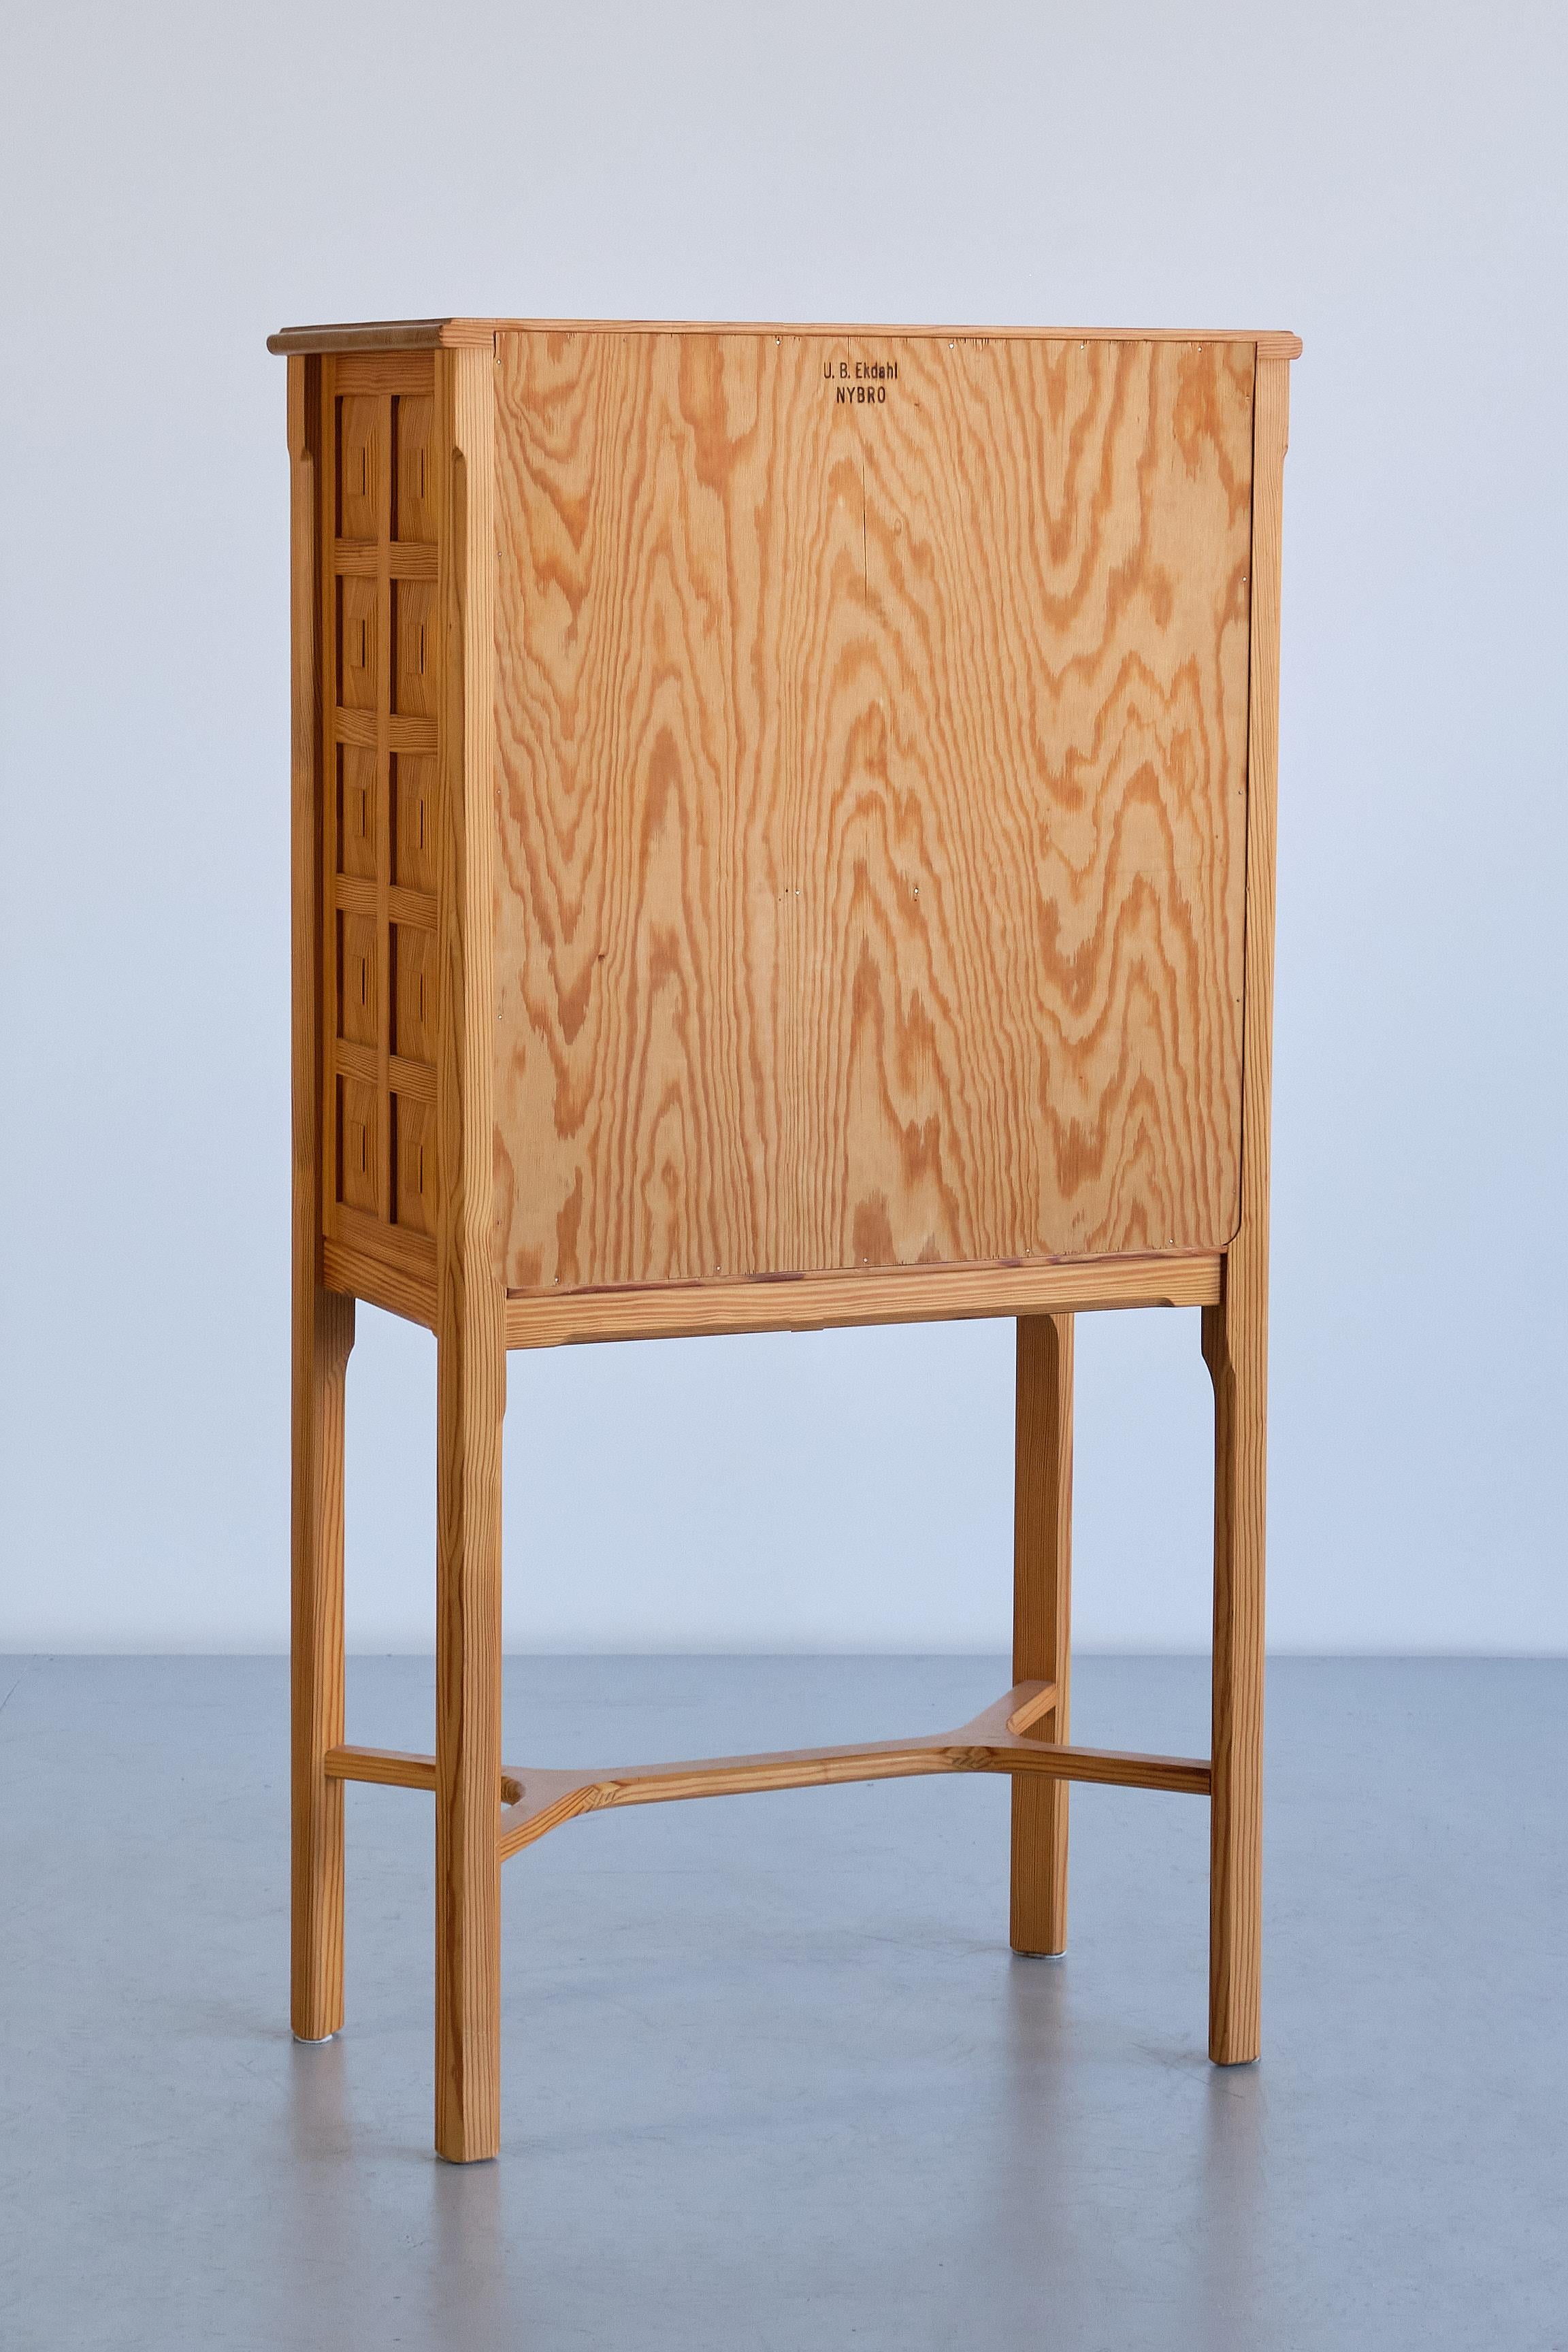 Ulf Ekdahl Cabinet in Solid Pine Wood and Brass, Nybro, Sweden, 1979 In Good Condition For Sale In The Hague, NL